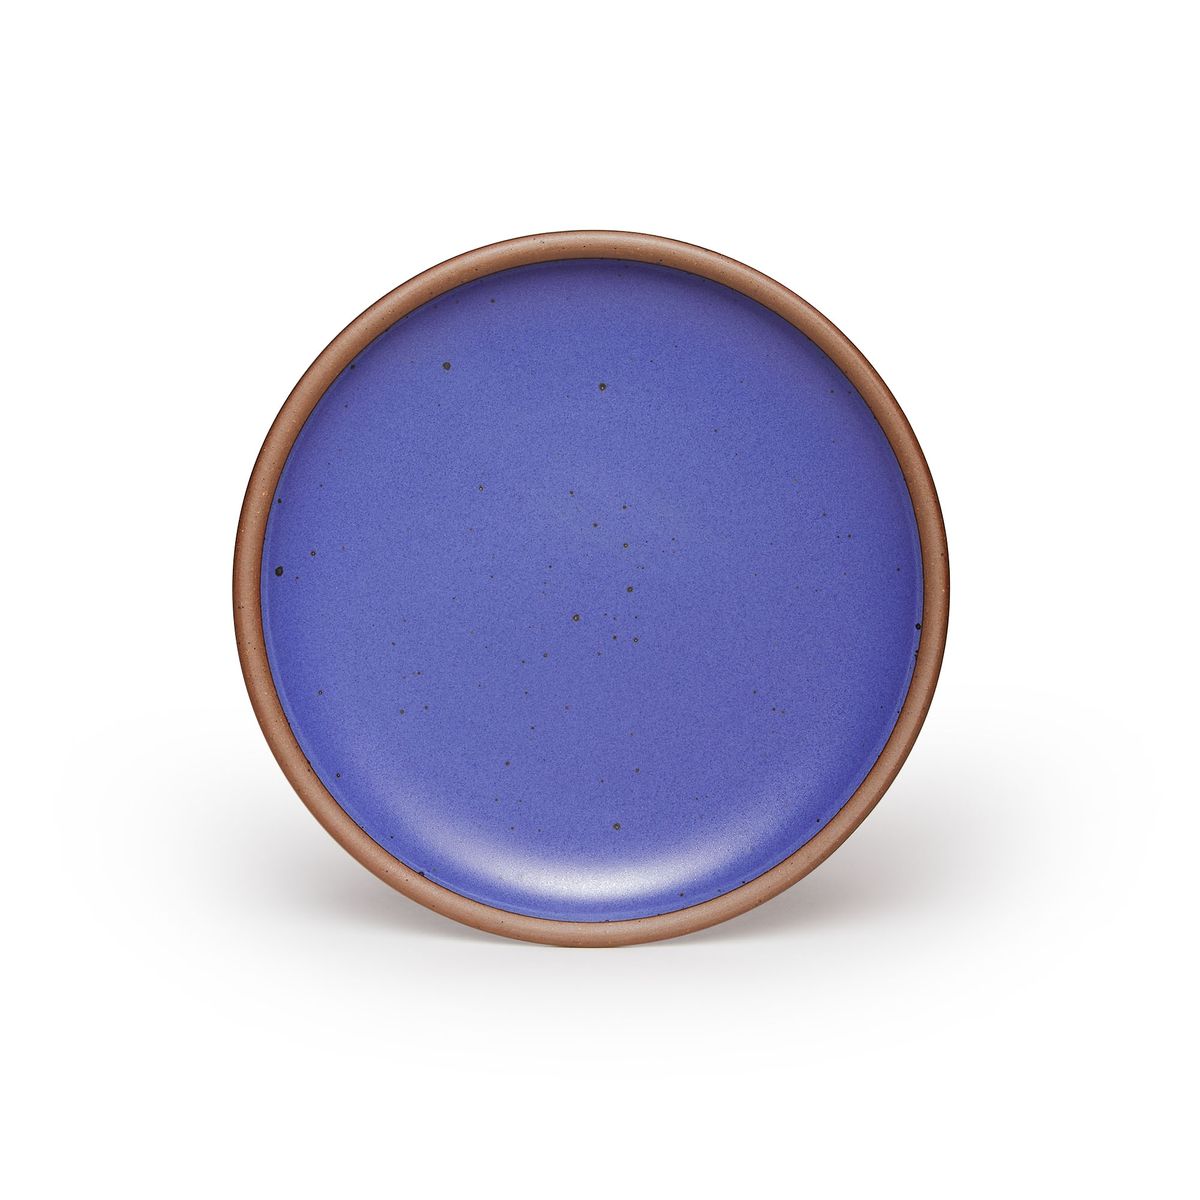 A dinner sized ceramic plate in a true cool blue color featuring iron speckles and an unglazed rim